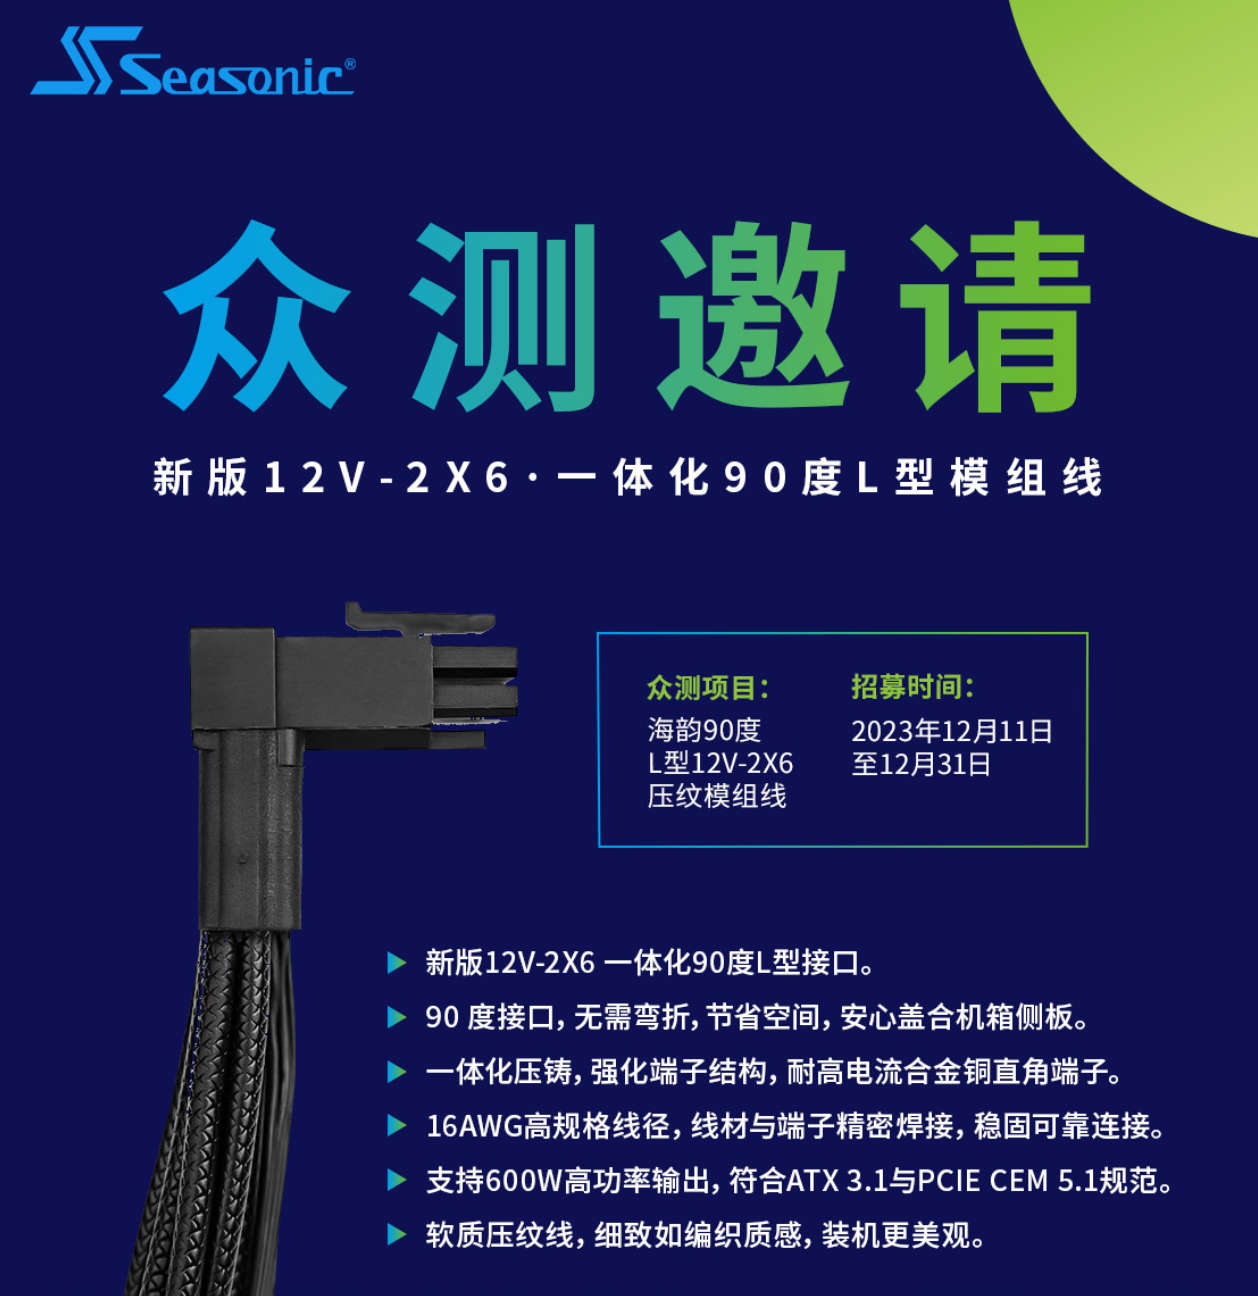 Seasonic reveals its new 12V-2x6 angled power cable, invites RTX 40 owners  to test it 